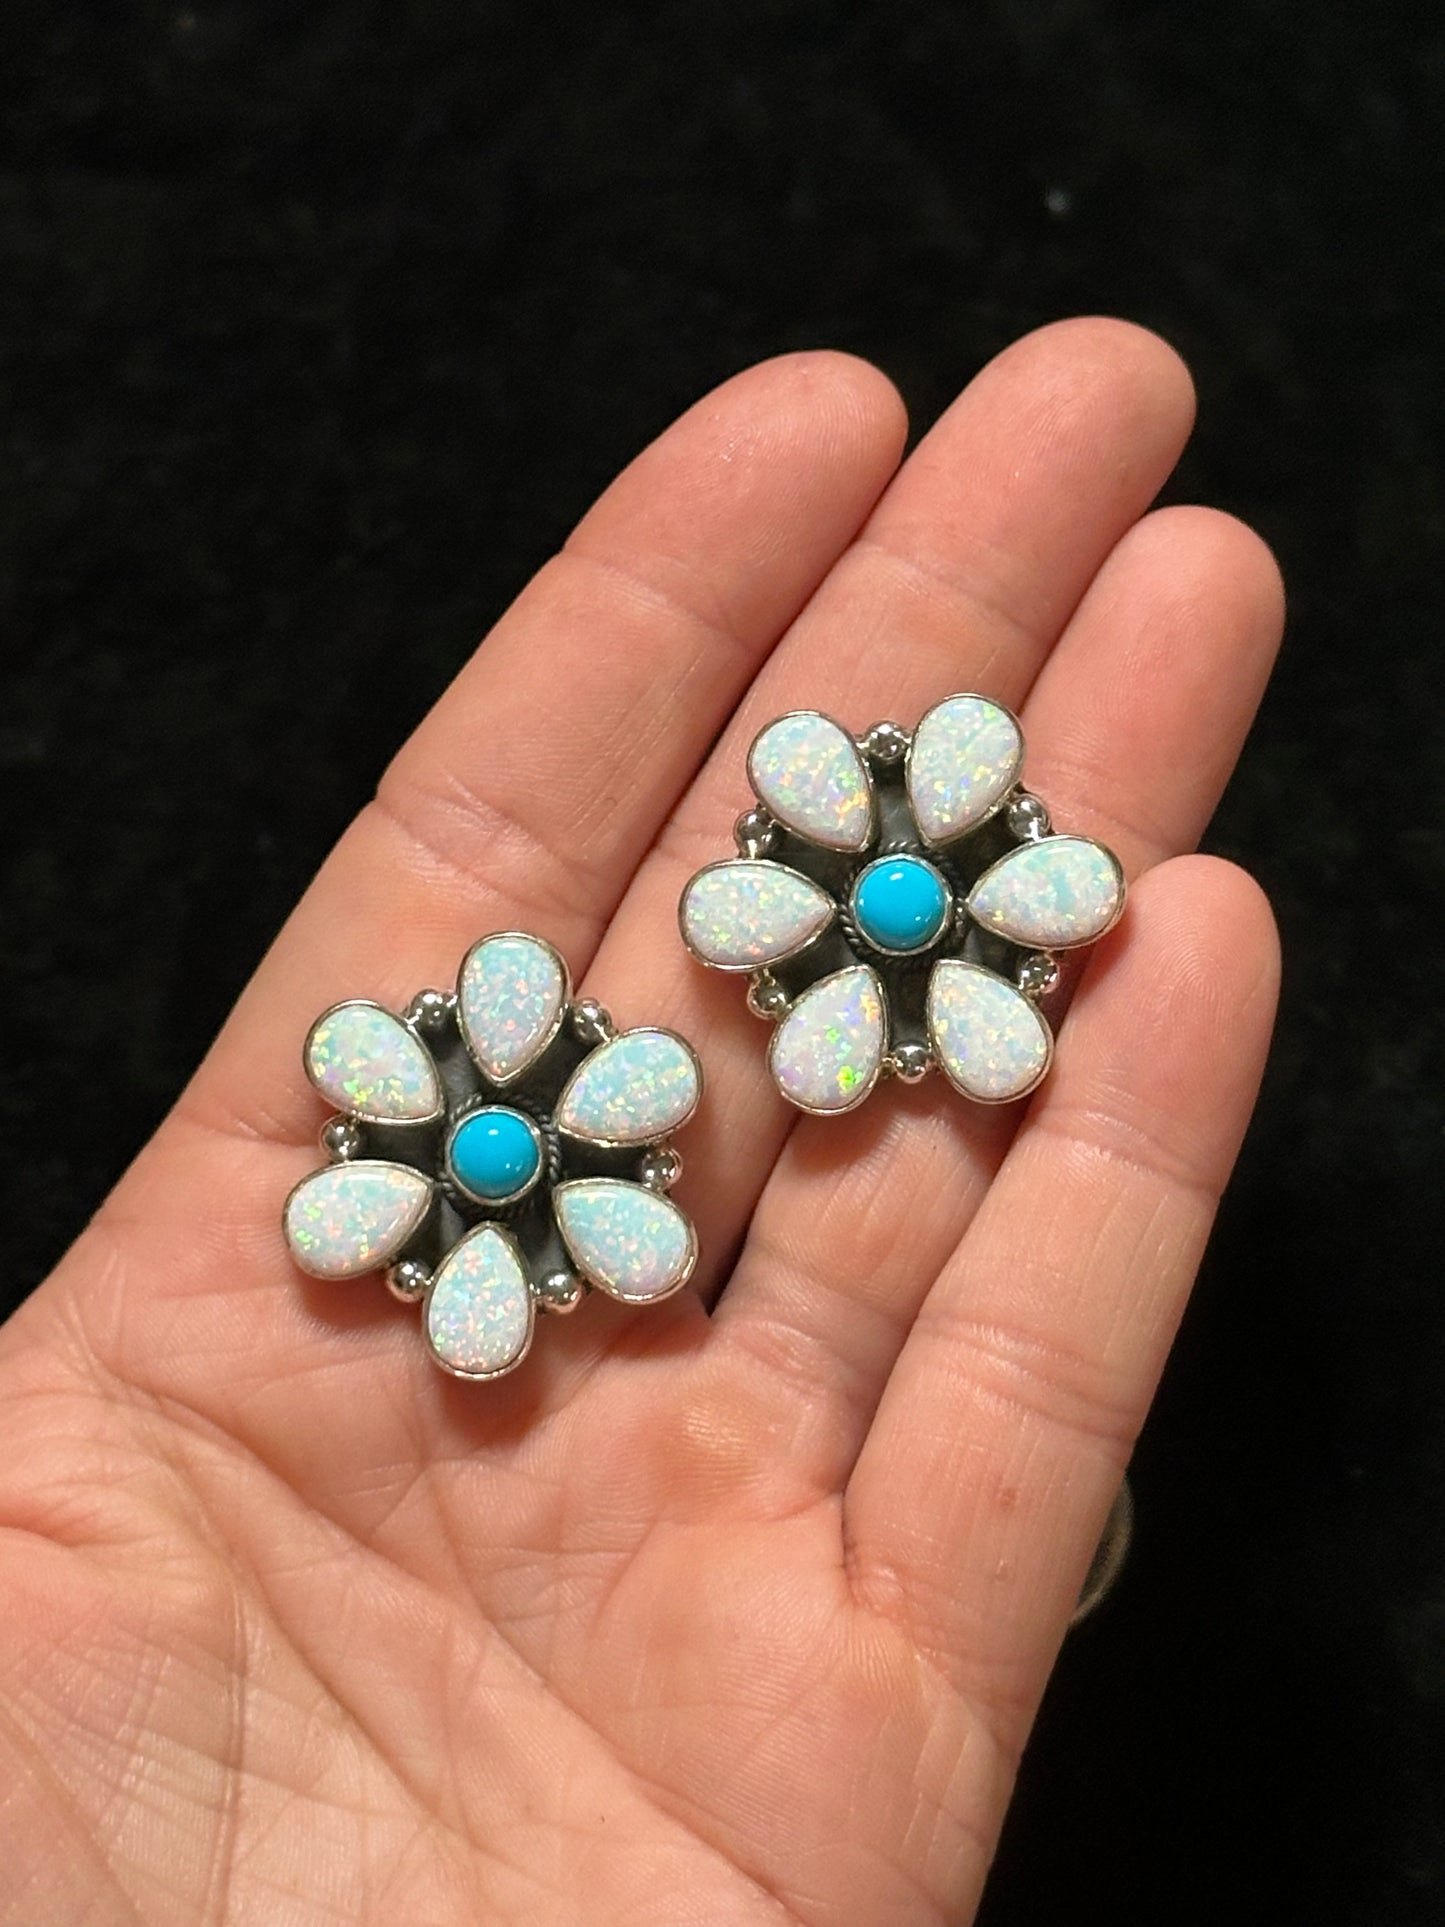 White Opal and Sleeping Beauty Turquoise Flower Post Earrings